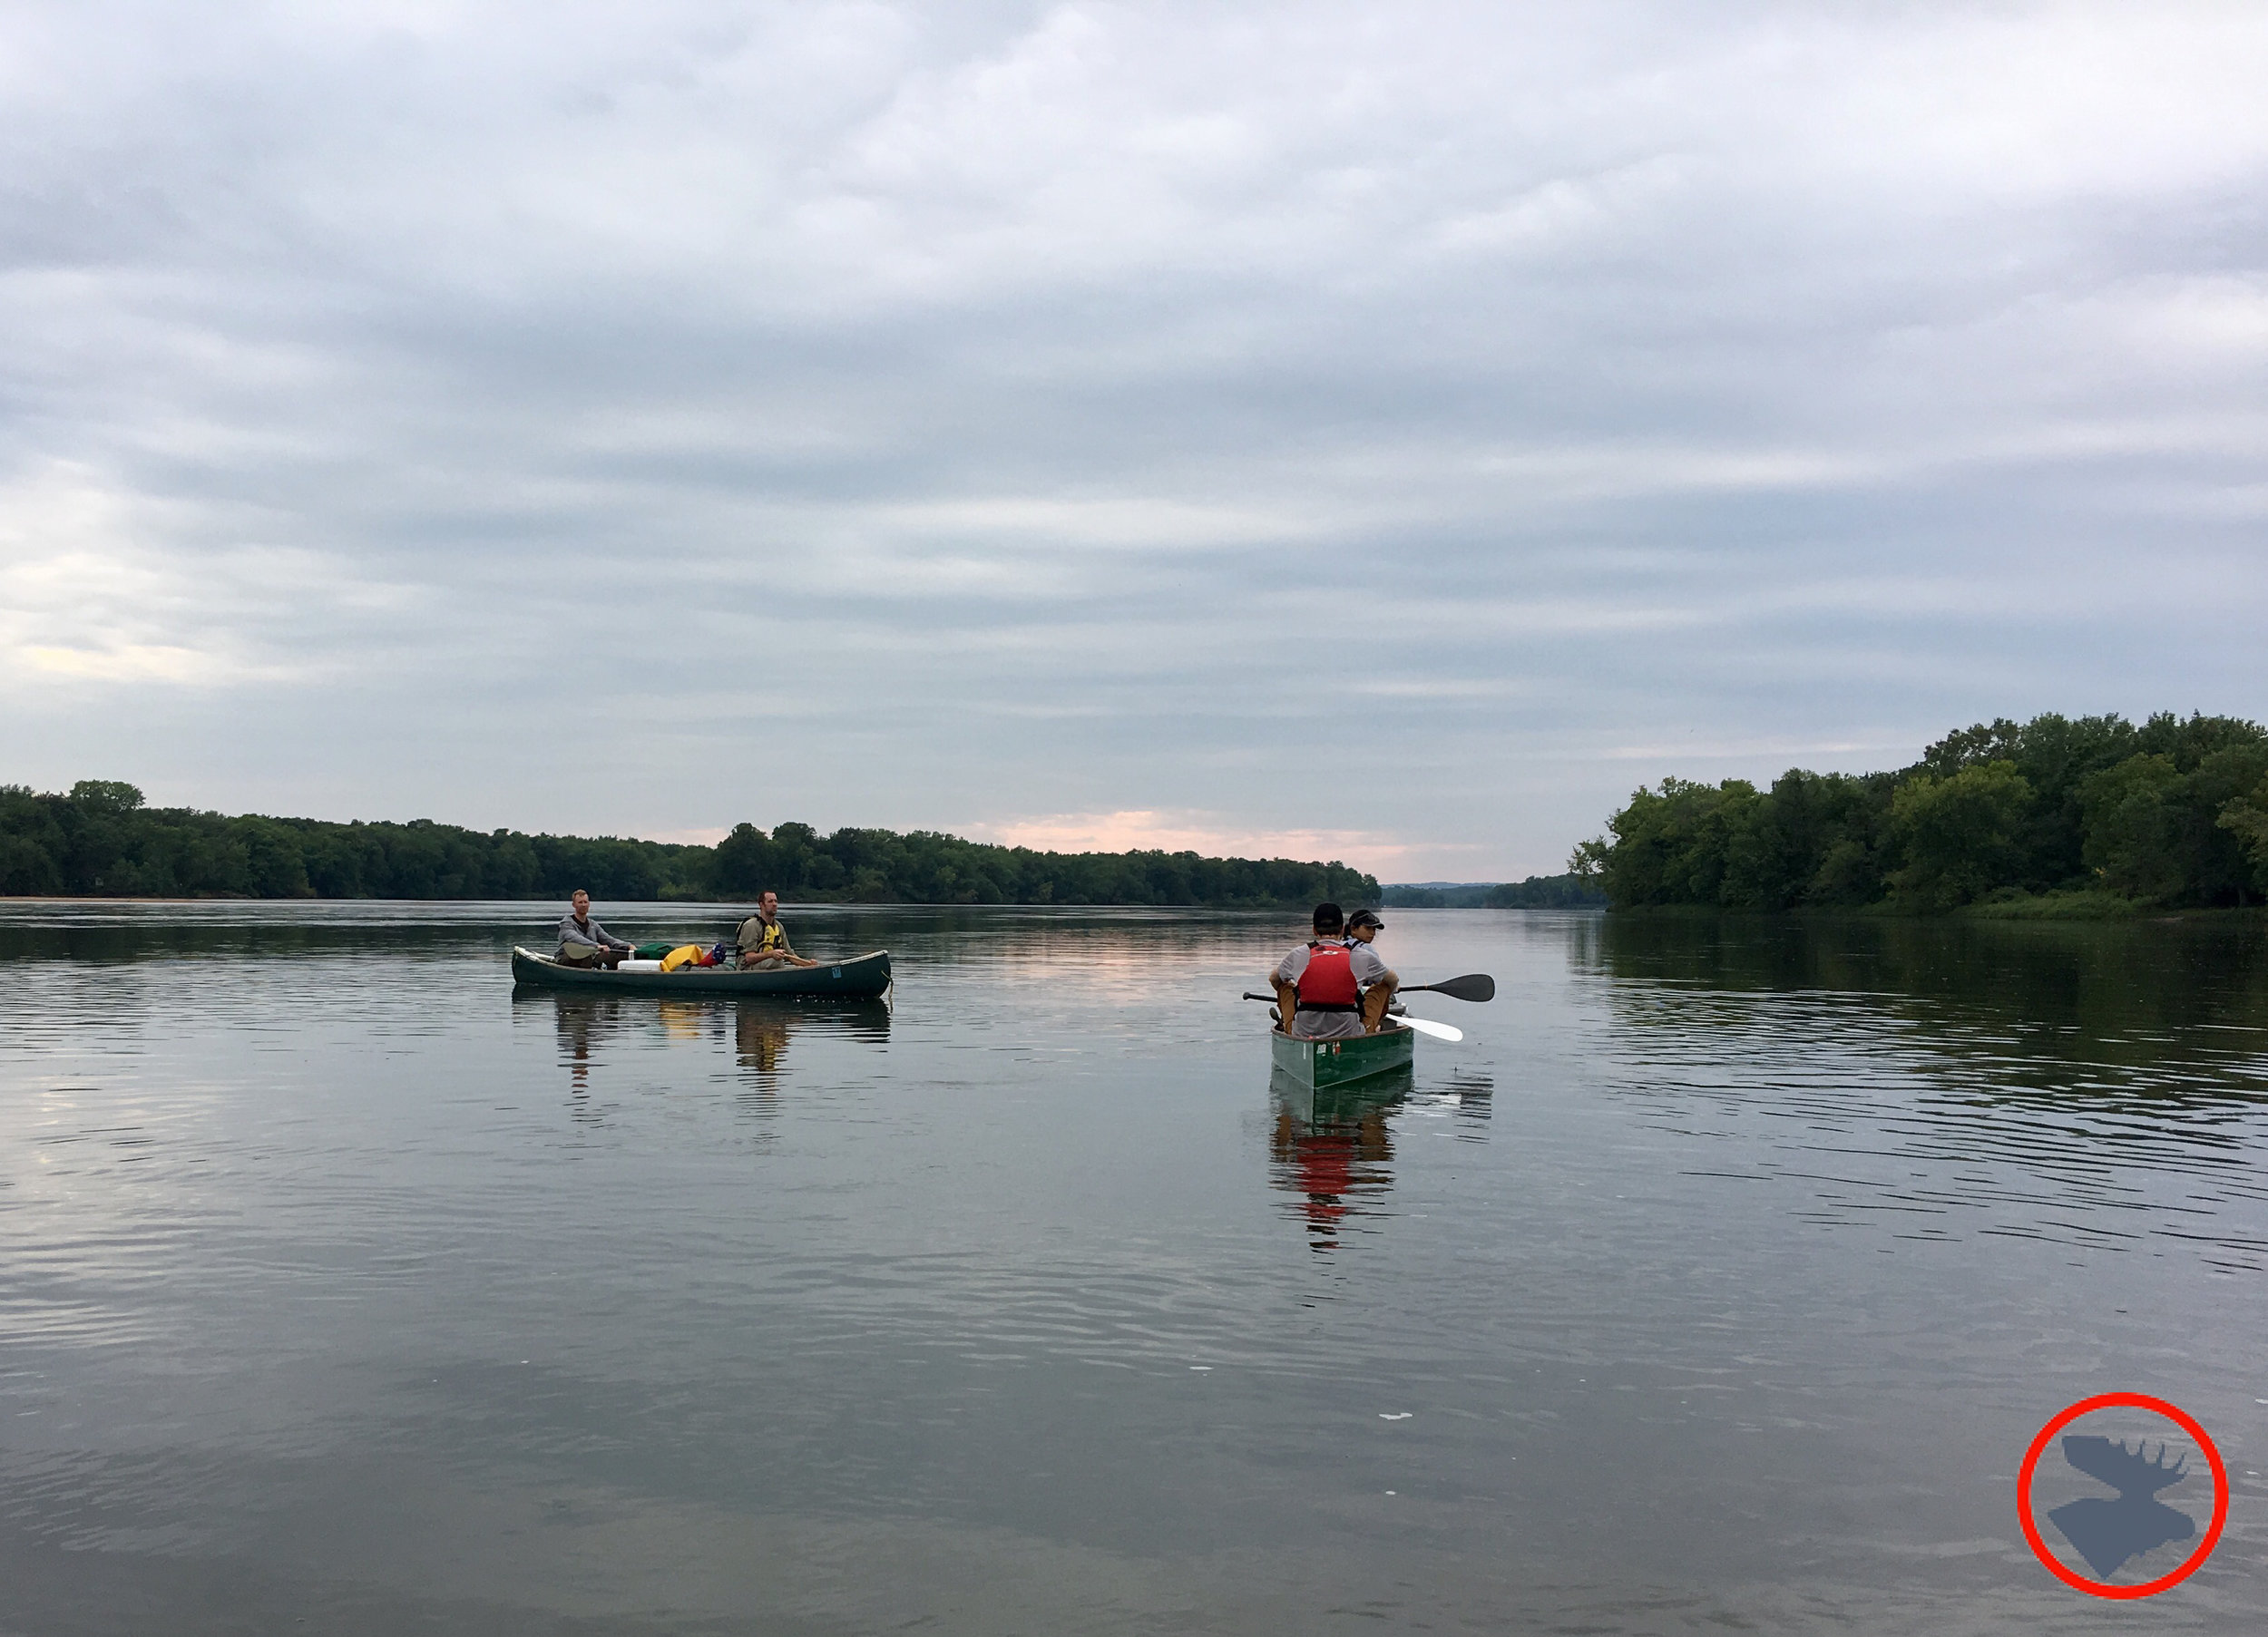 BMP-Post_Expedition-Log_WI-River_Canoe-Crew-on-the-River_8-18-17.jpg